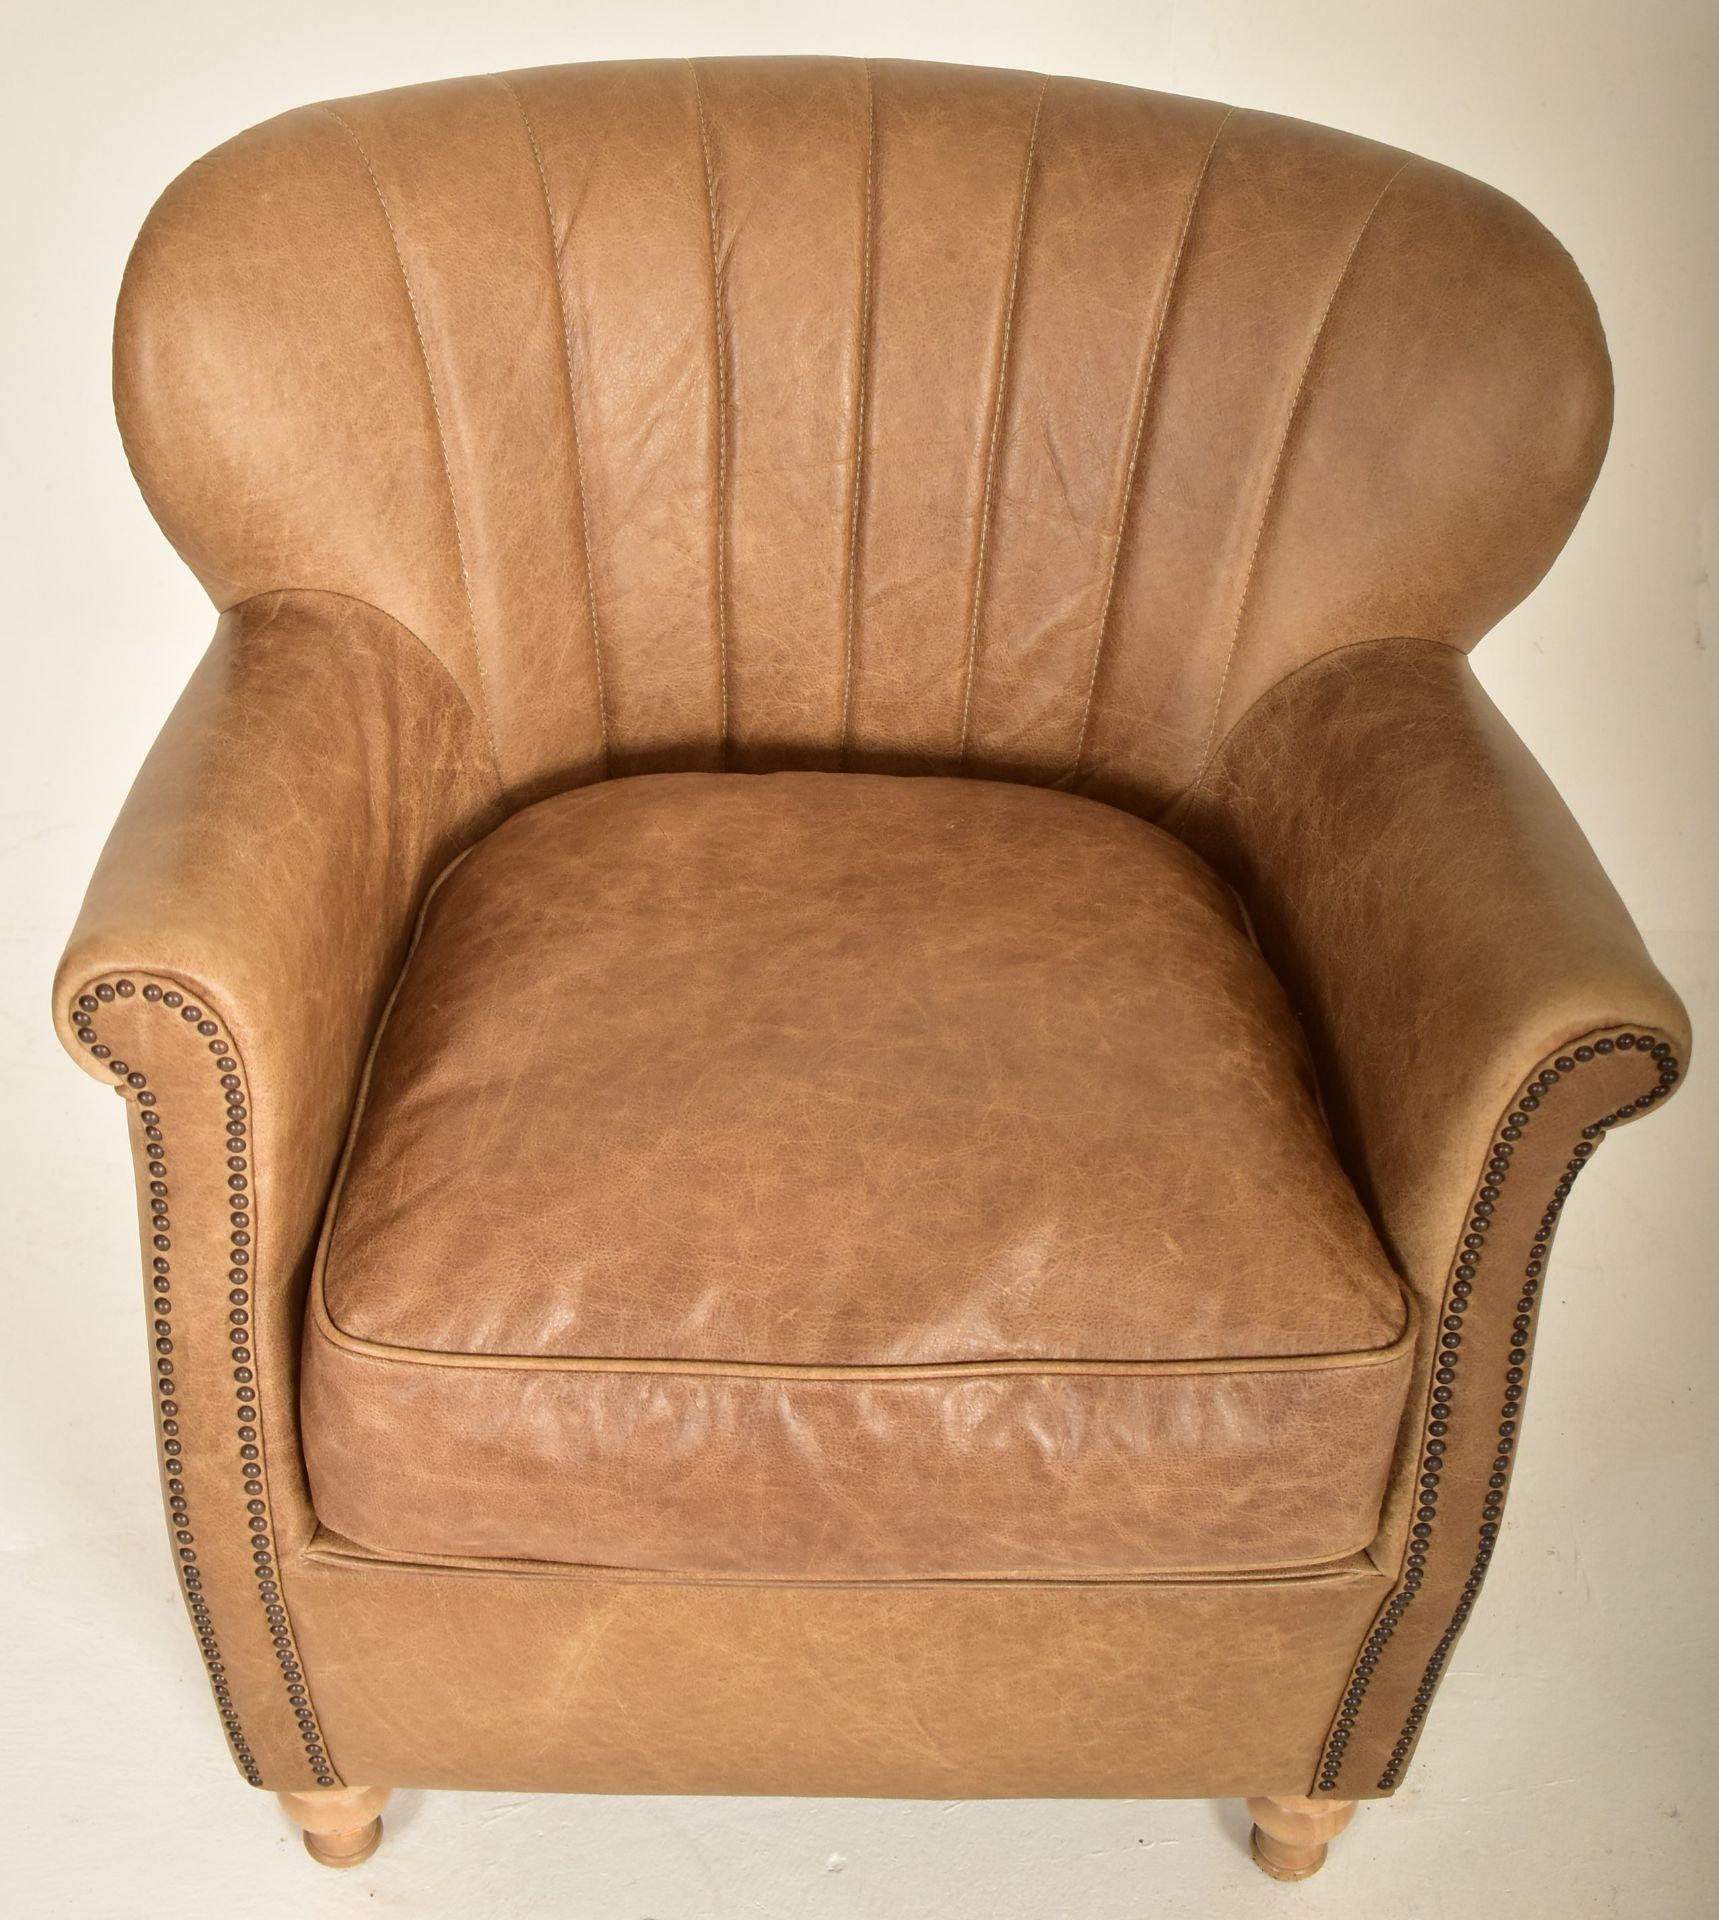 MILL HOUSE FURNITURE - PERCY RANGE - LEATHER ARMCHAIR - Image 2 of 6